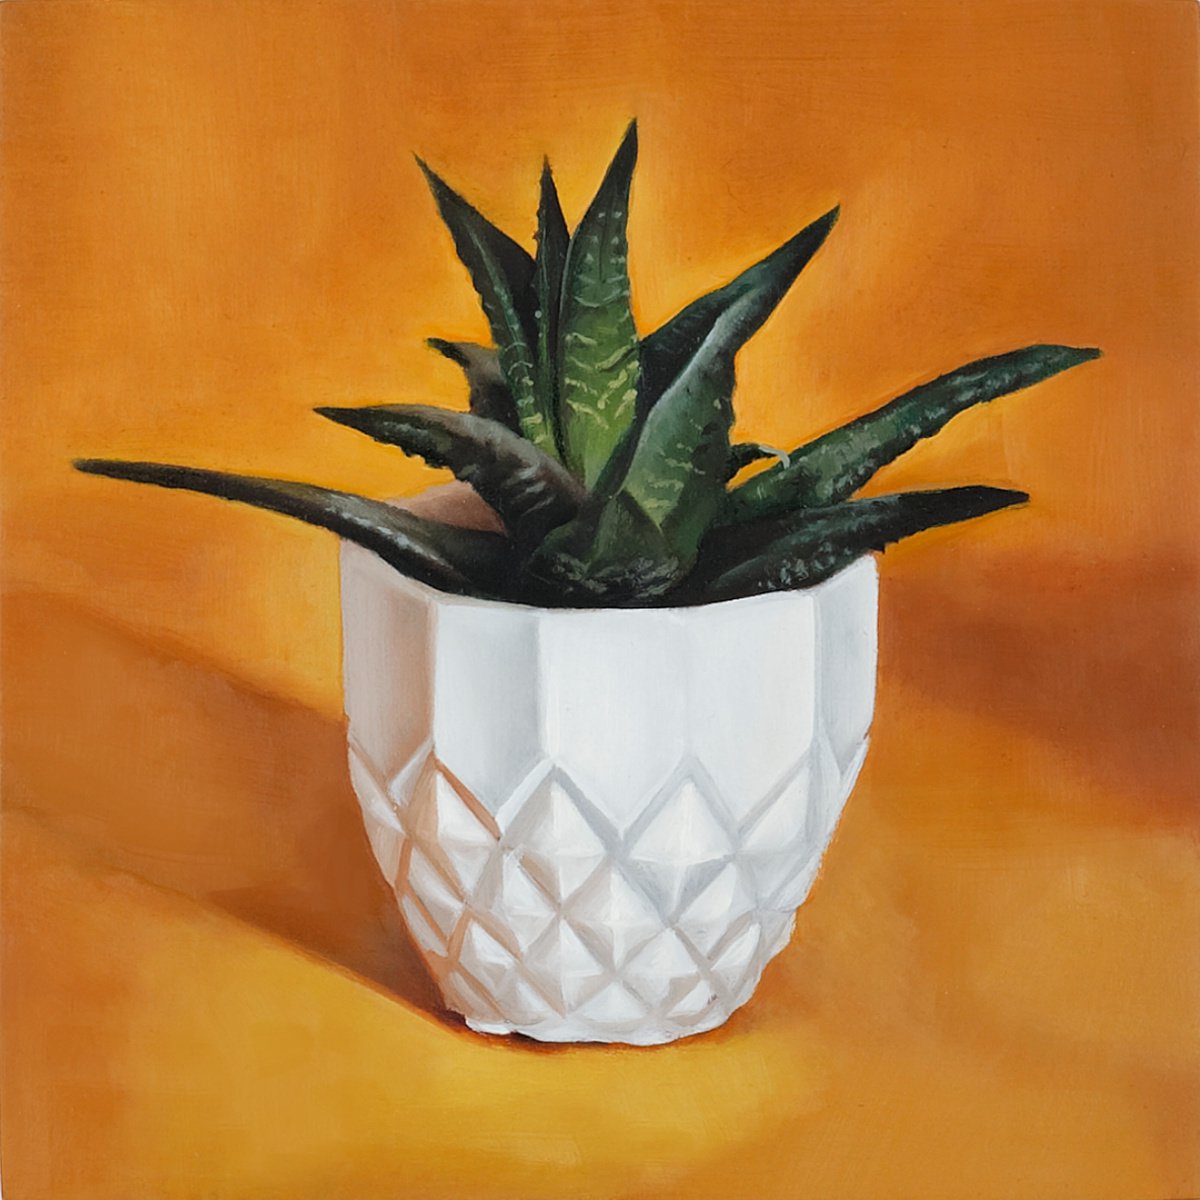 Small Succulent on Orange Background by Louis Savage